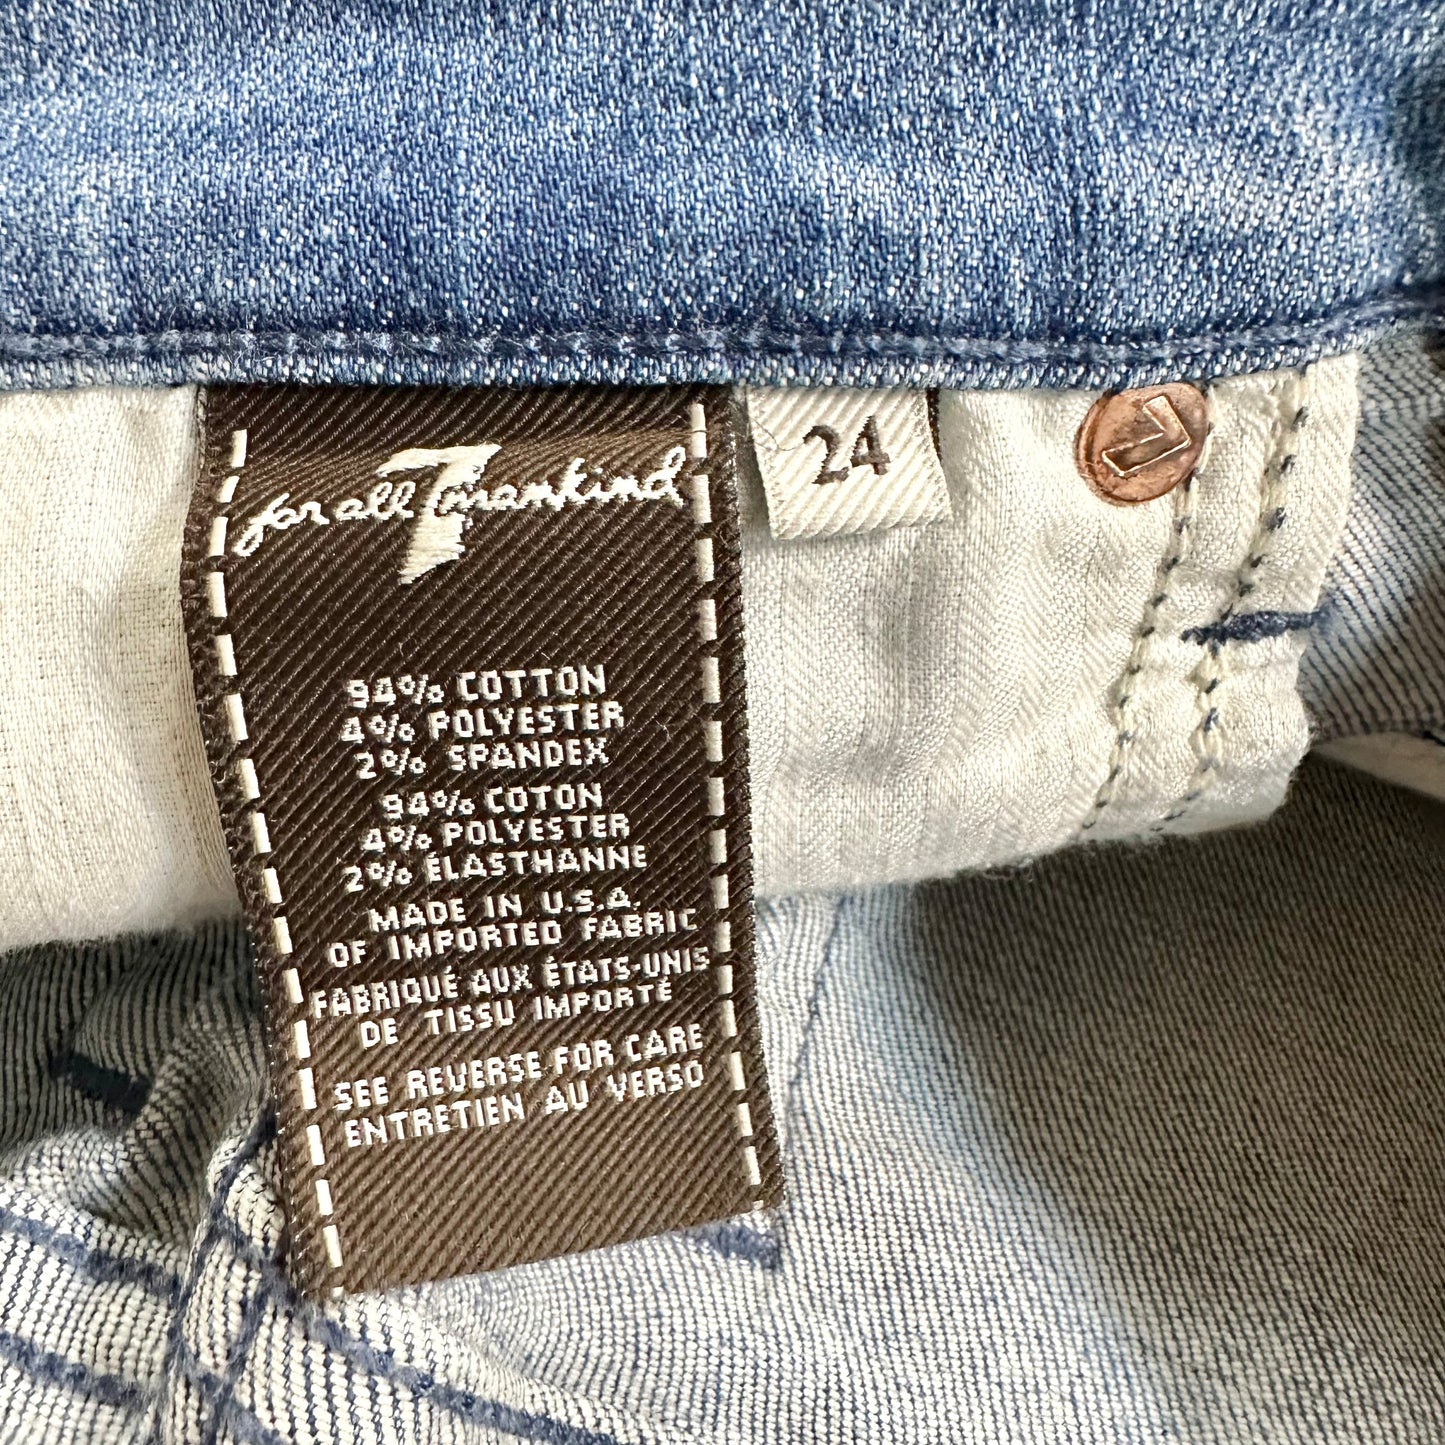 Jeans Designer By Seven For All Mankind  Size: 0